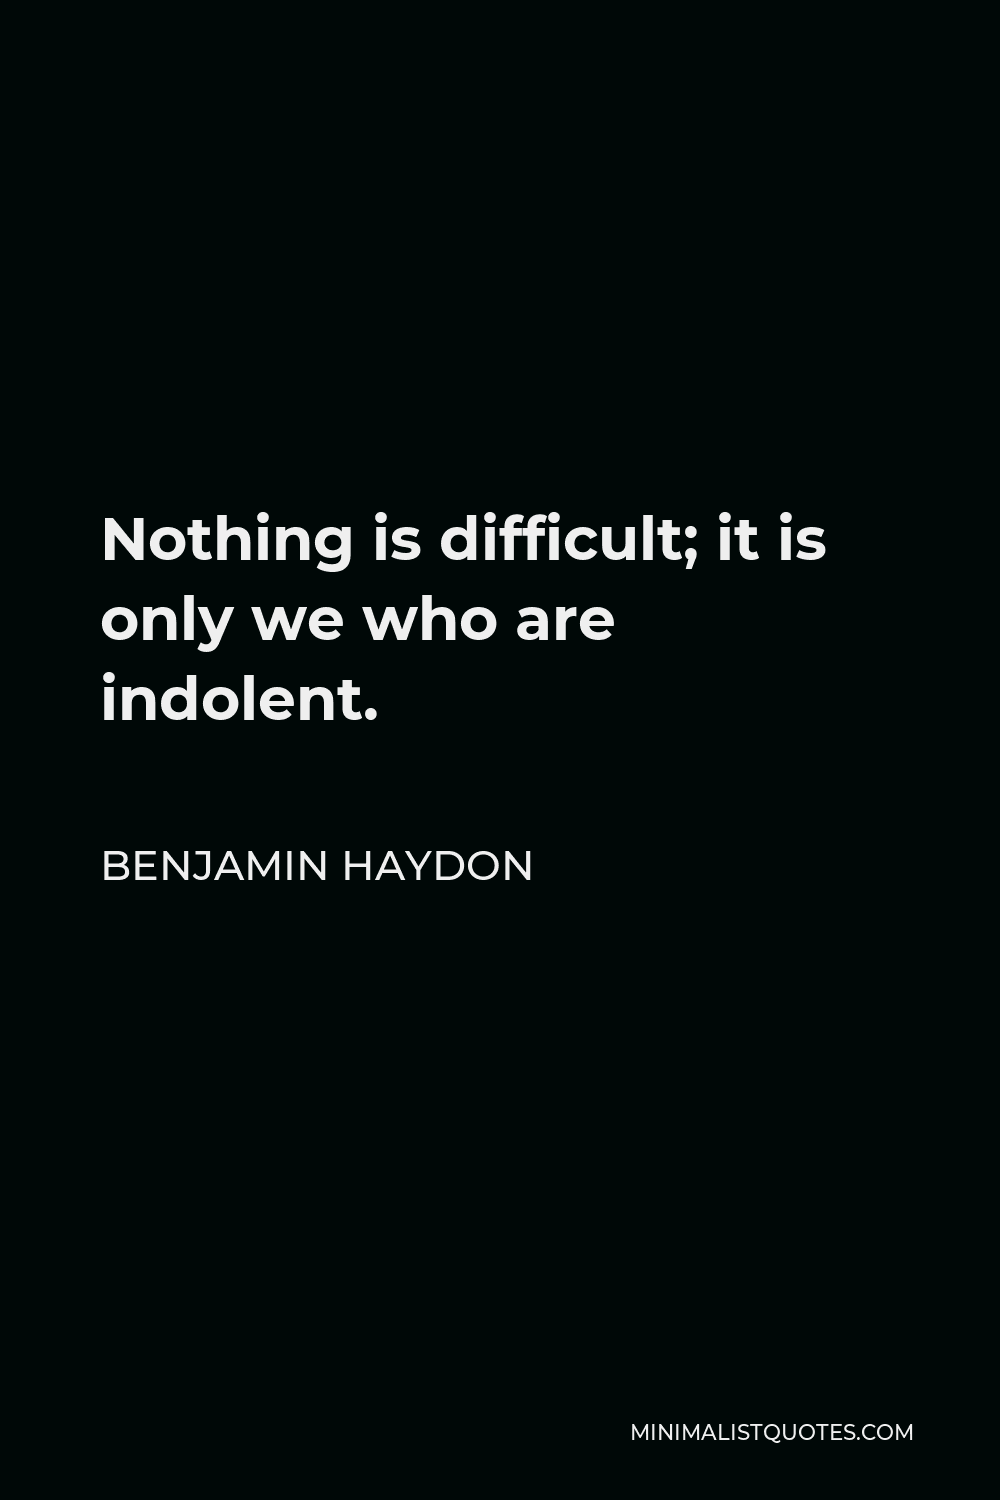 Benjamin Haydon Quote - Nothing is difficult; it is only we who are indolent.